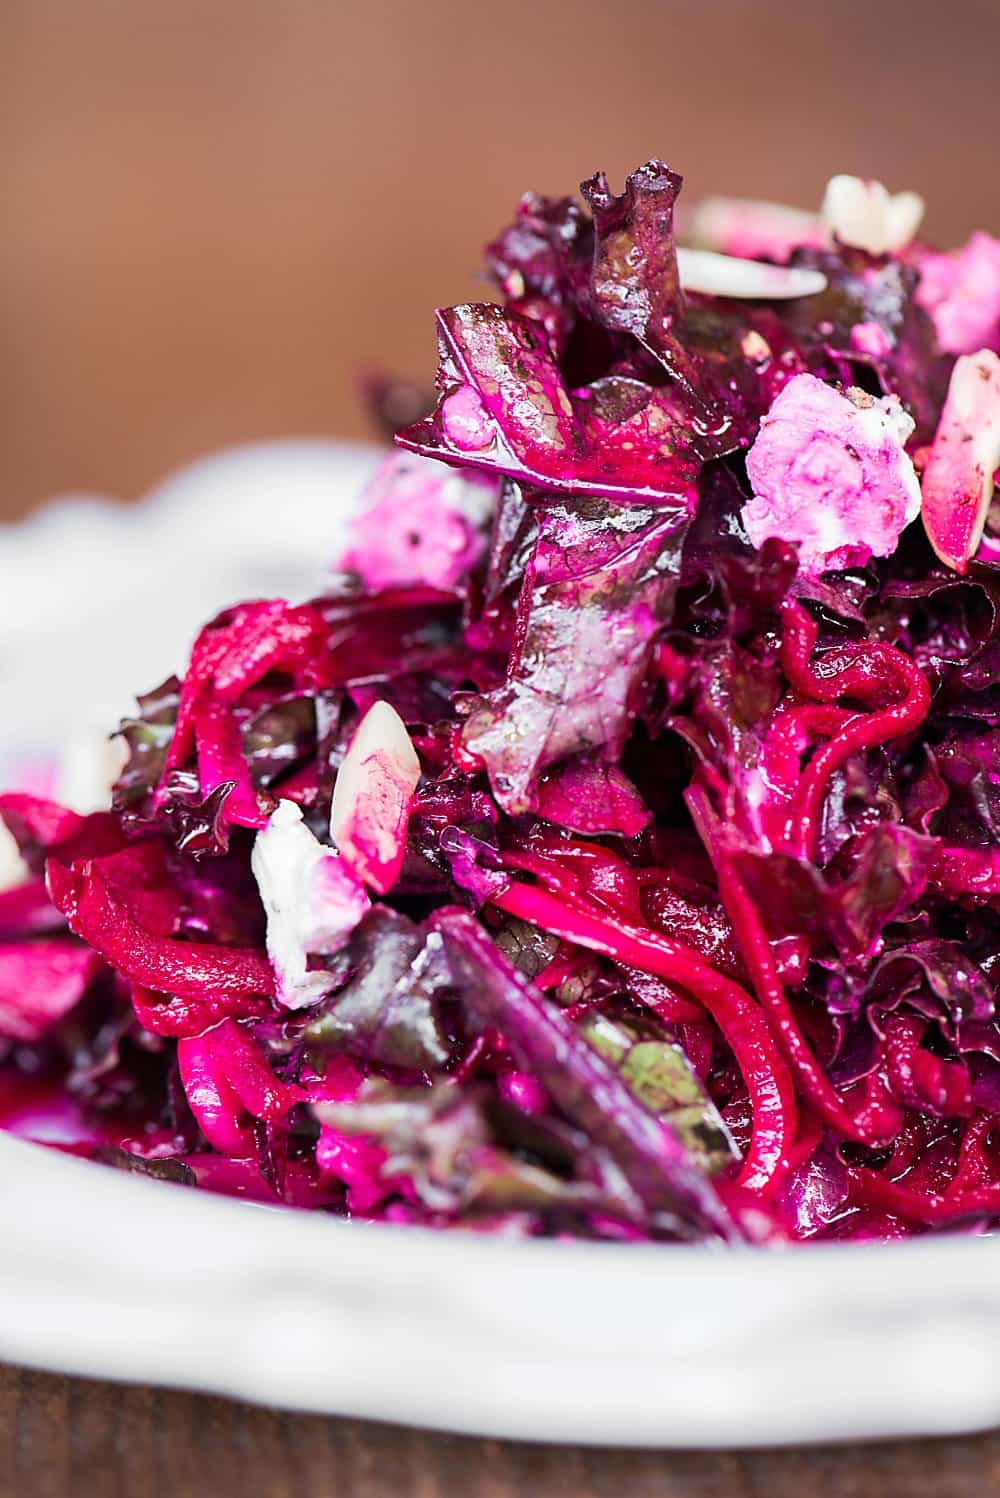 A close up of shredded beet and kale salad